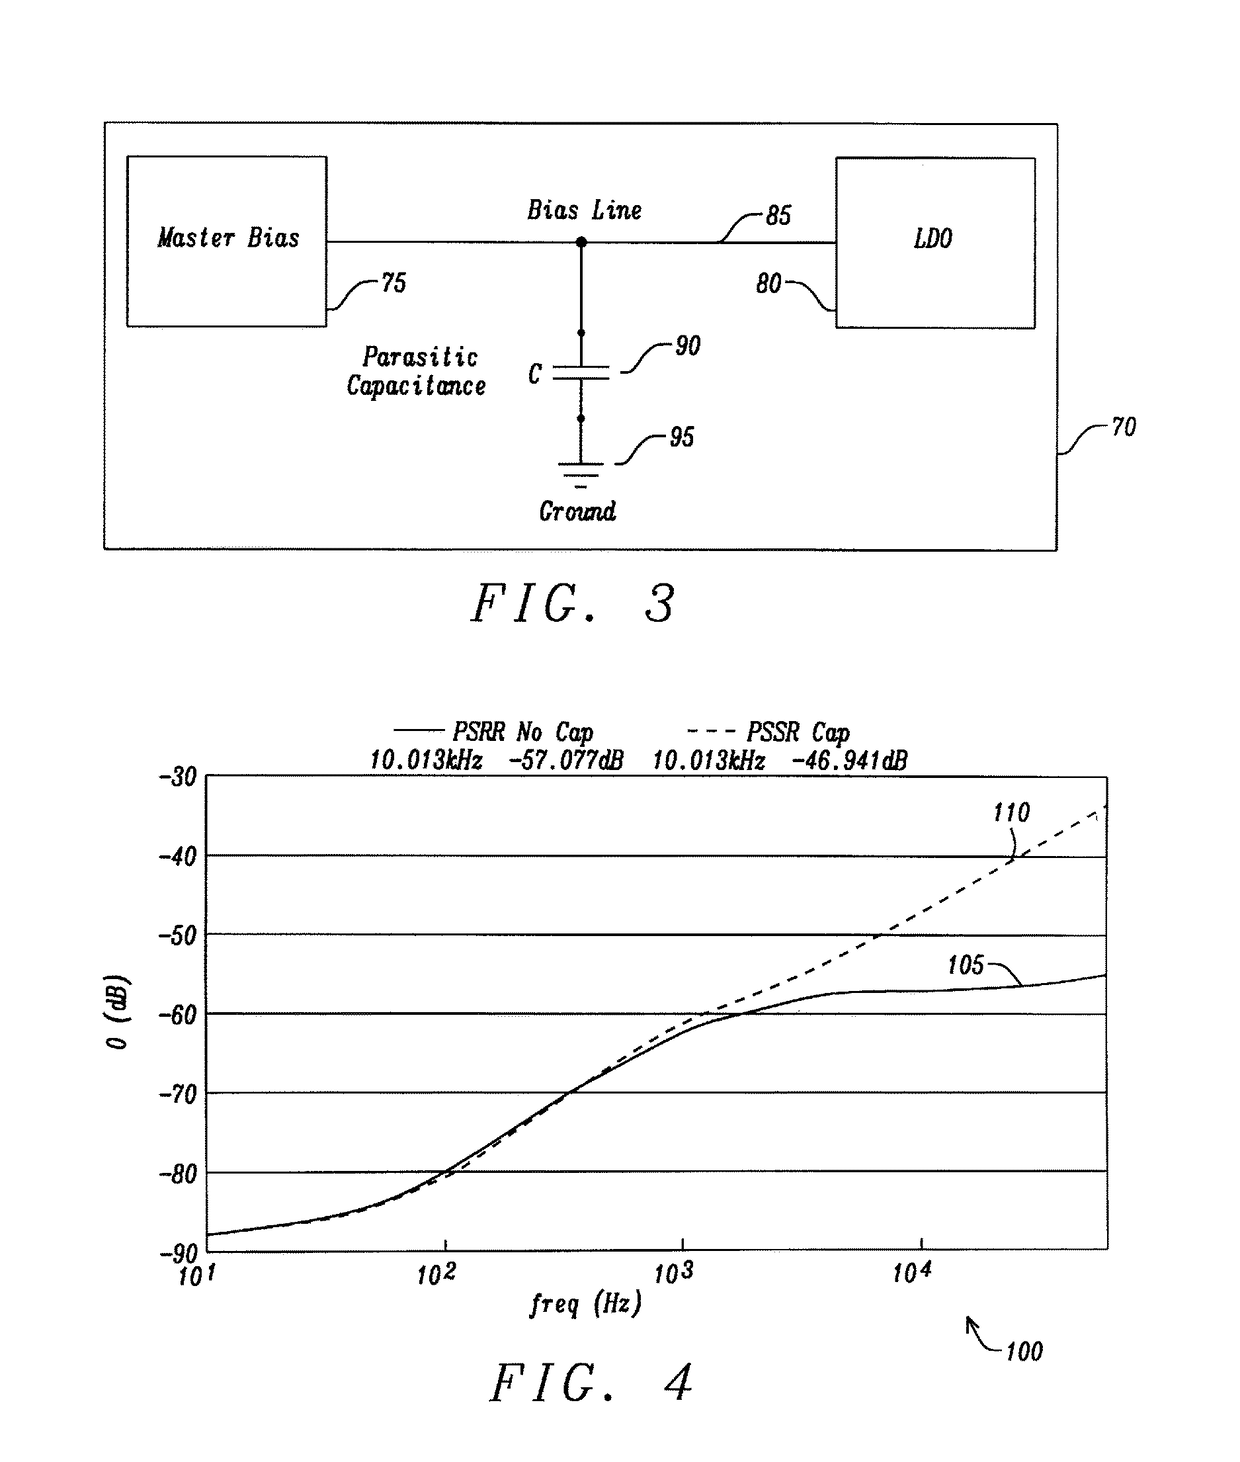 Apparatus and method for a voltage regulator with improved power supply reduction ratio (PSRR) with reduced parasitic capacitance on bias signal lines